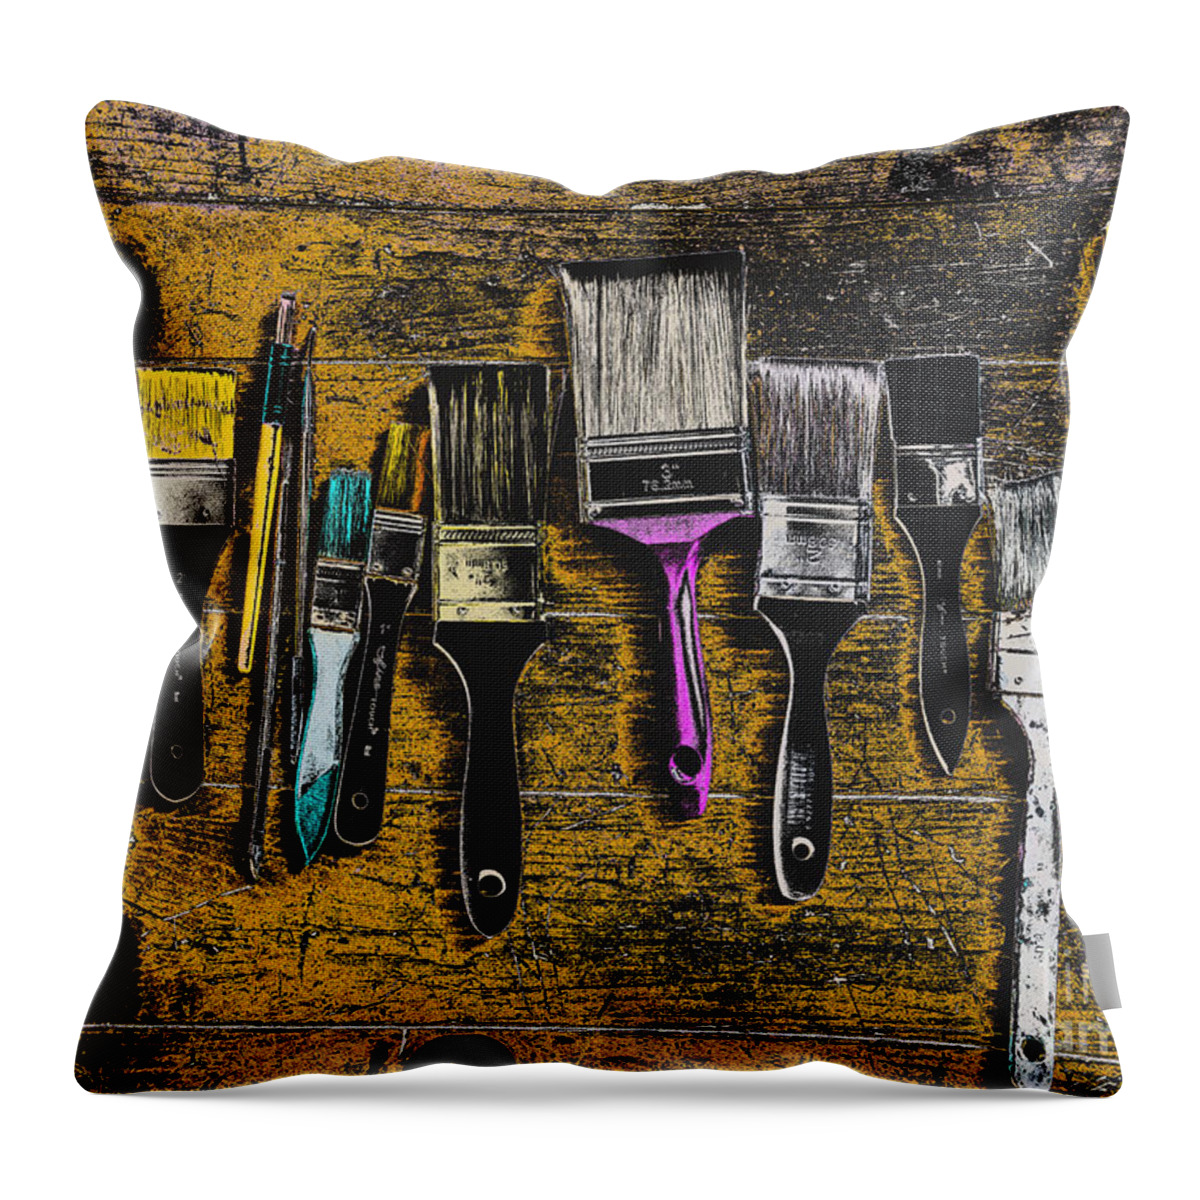 Paintbrushes Throw Pillow featuring the mixed media Paintbrushes #2 by Kae Cheatham